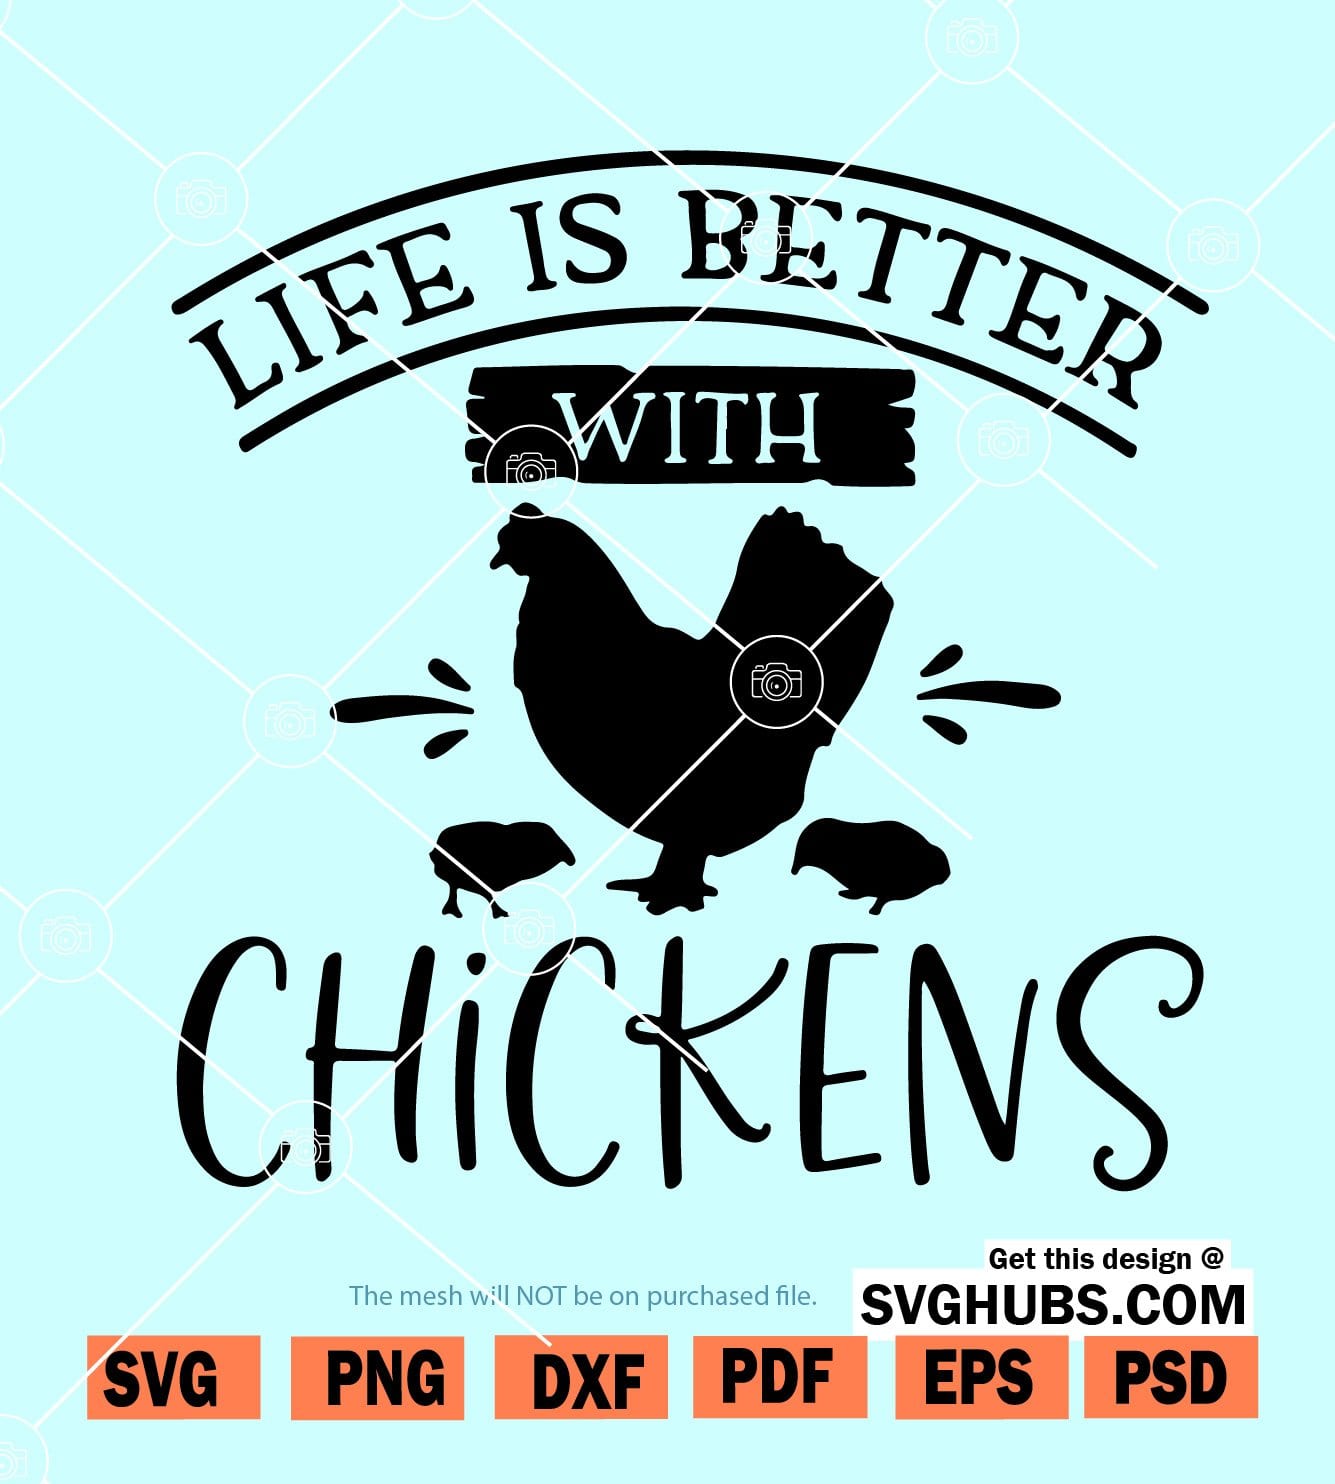 Life is better with chickens SVG